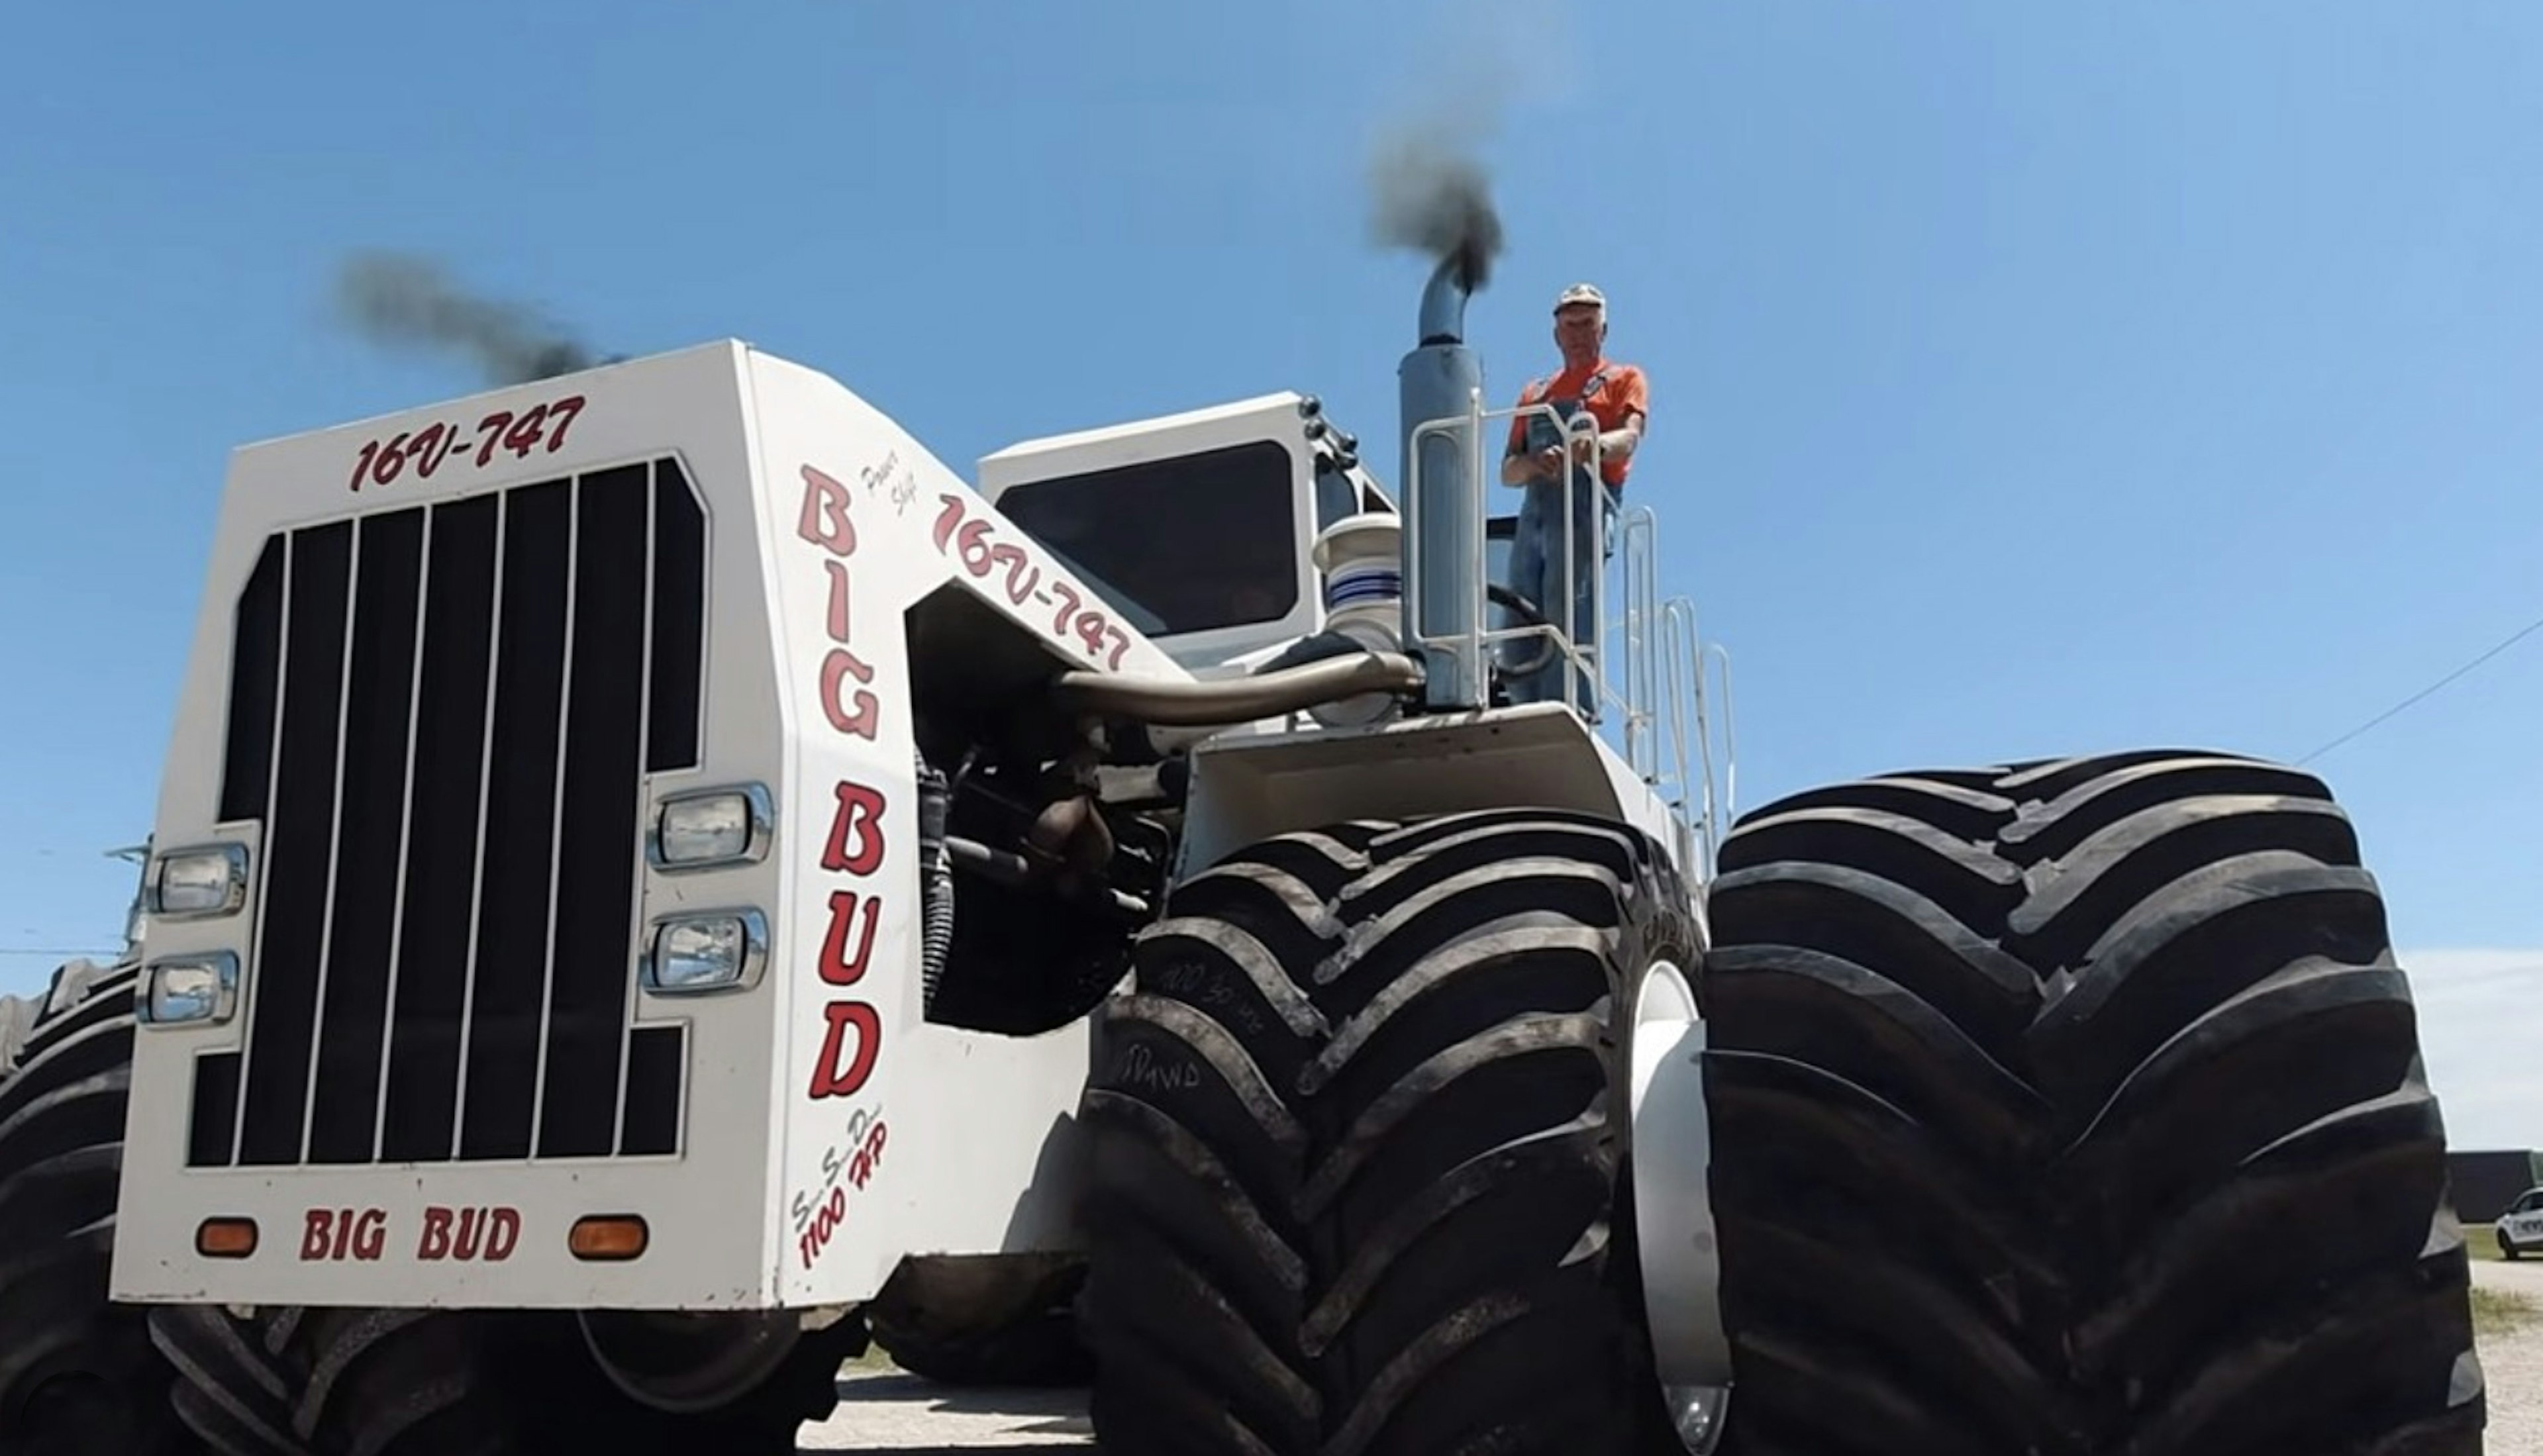 Big Bud, World’s Largest Tractor At 70,000 Pounds, Is Back After 40